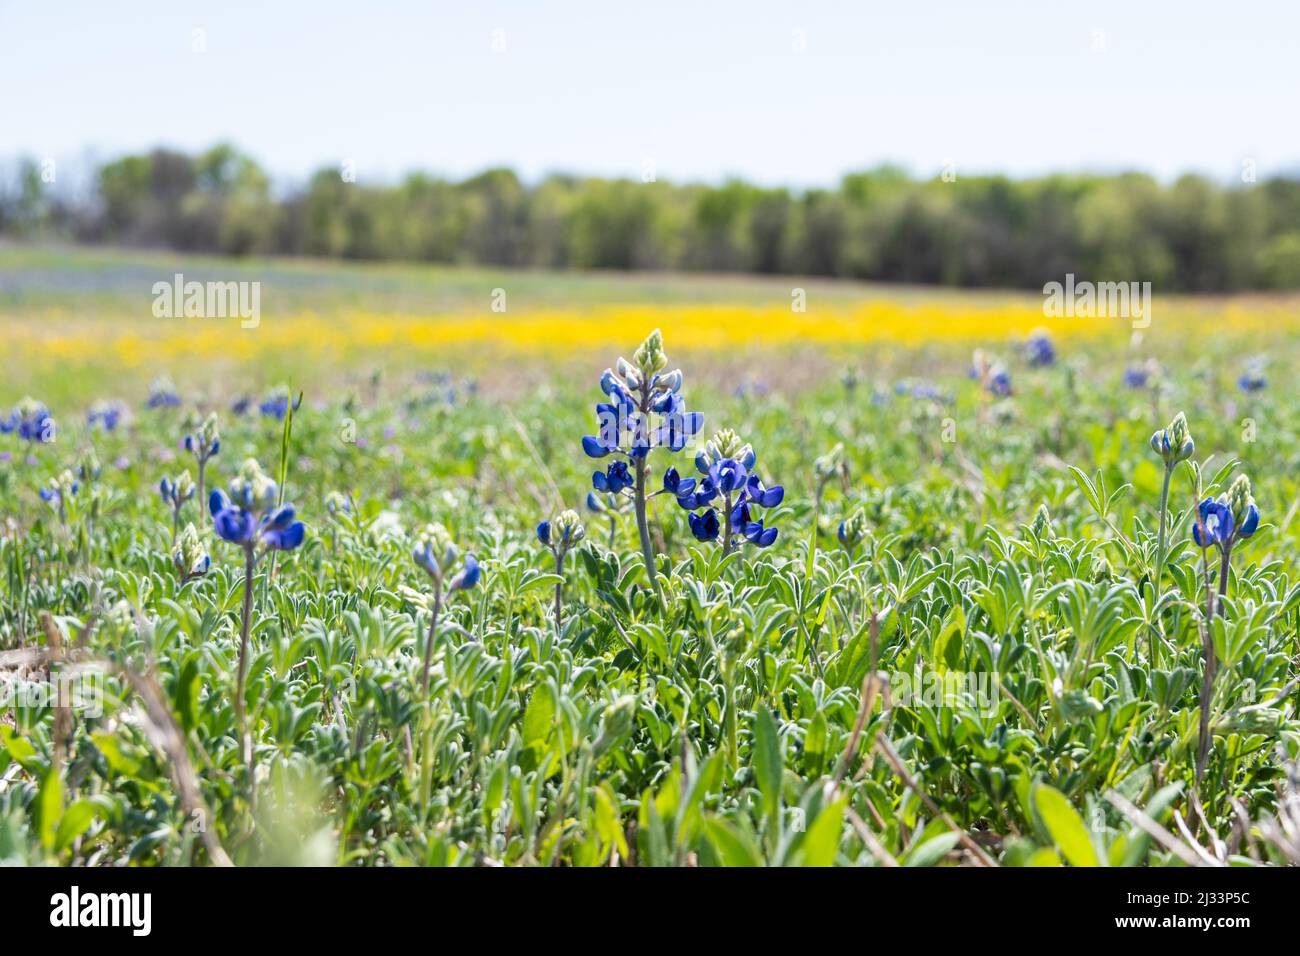 Closeup of some beautiful, blue Bluebonnet flowers blooming in a meadow on a sunny, spring morning with a bright patch of yellow flowers in the blurry Stock Photo